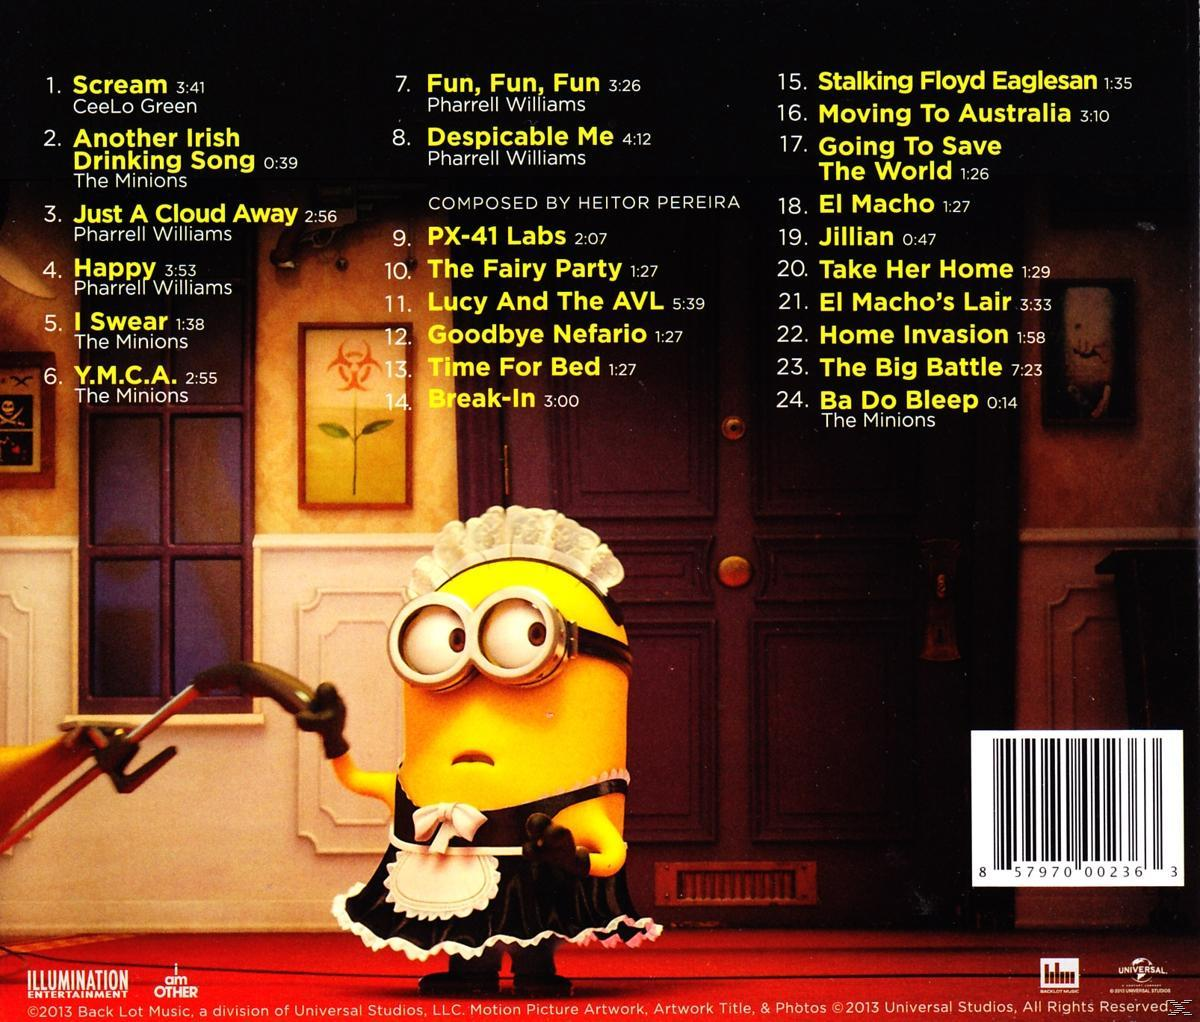 2 Despicable Williams Me - (CD) Pharrell -